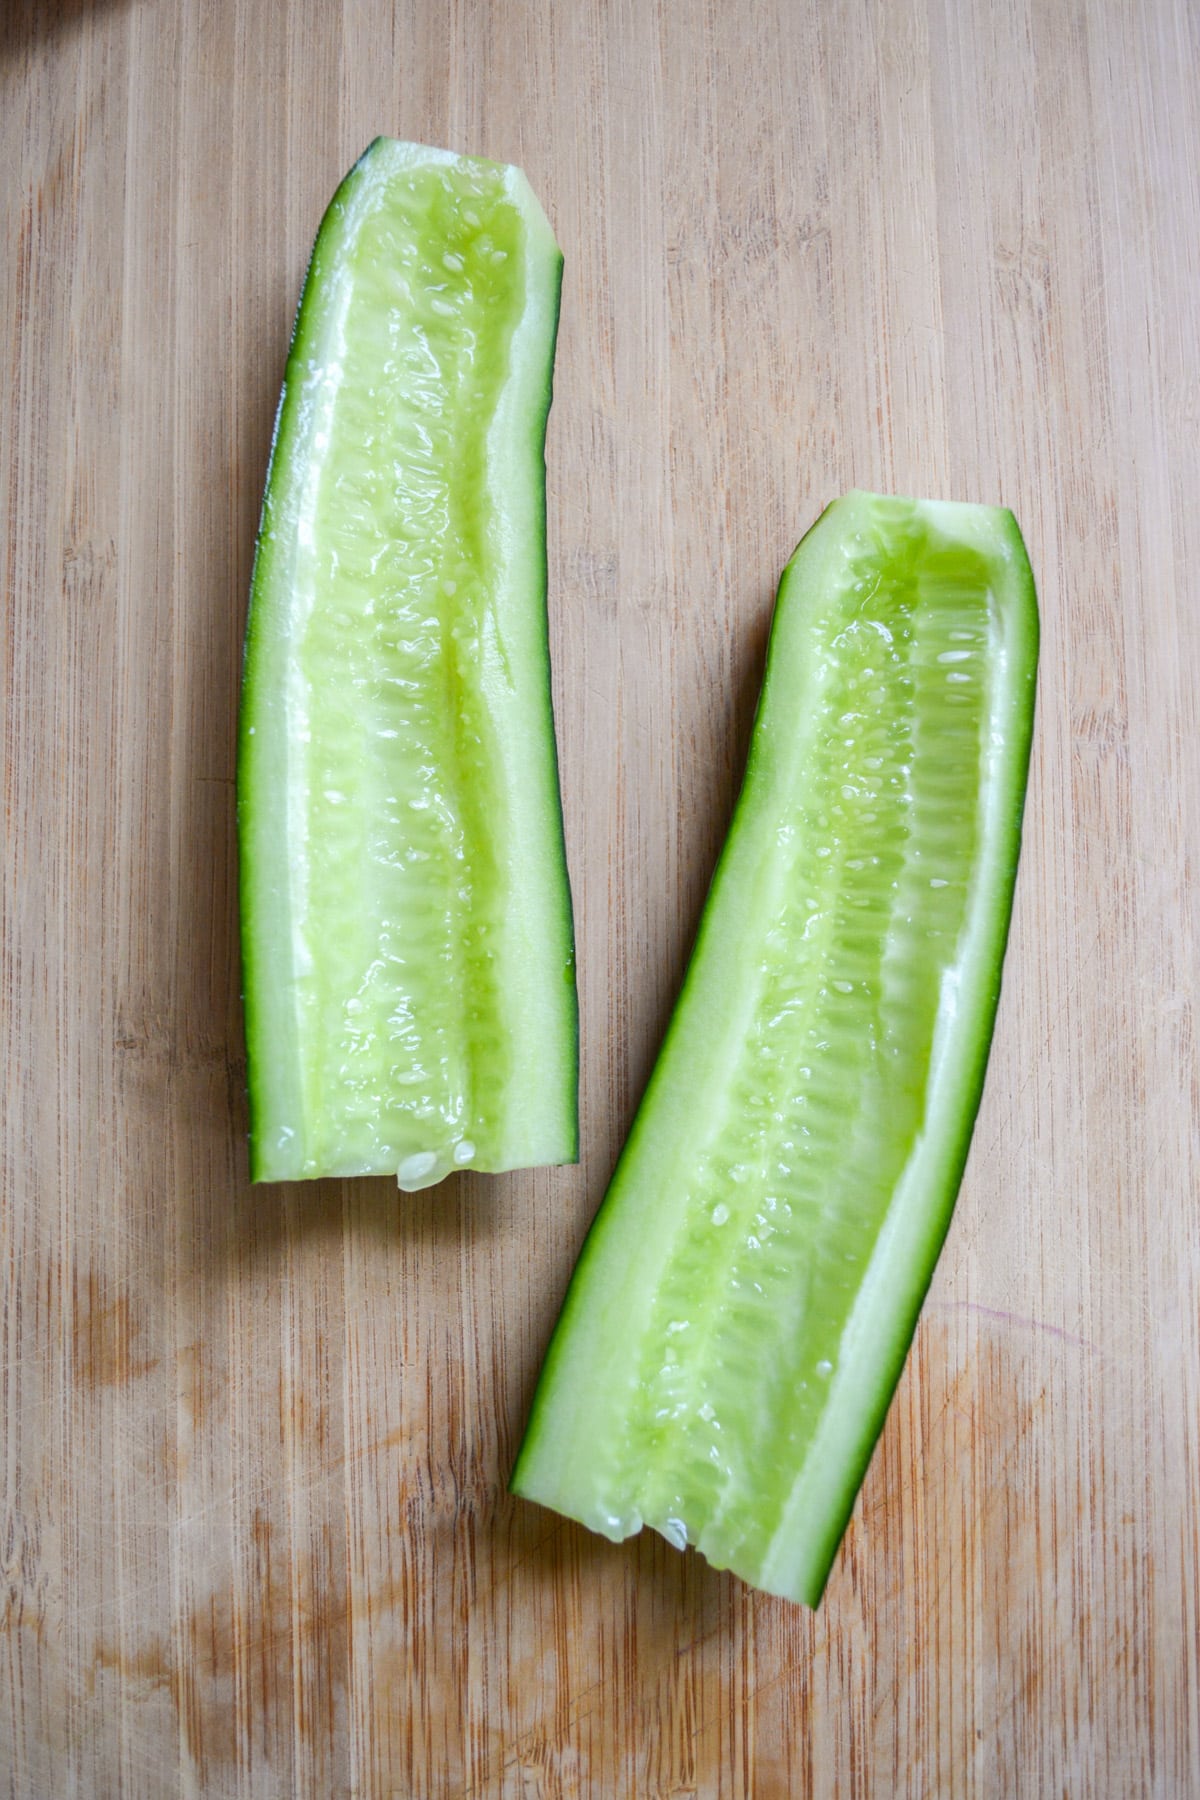 Cucumber that has beed sliced in half with the seeds removed.